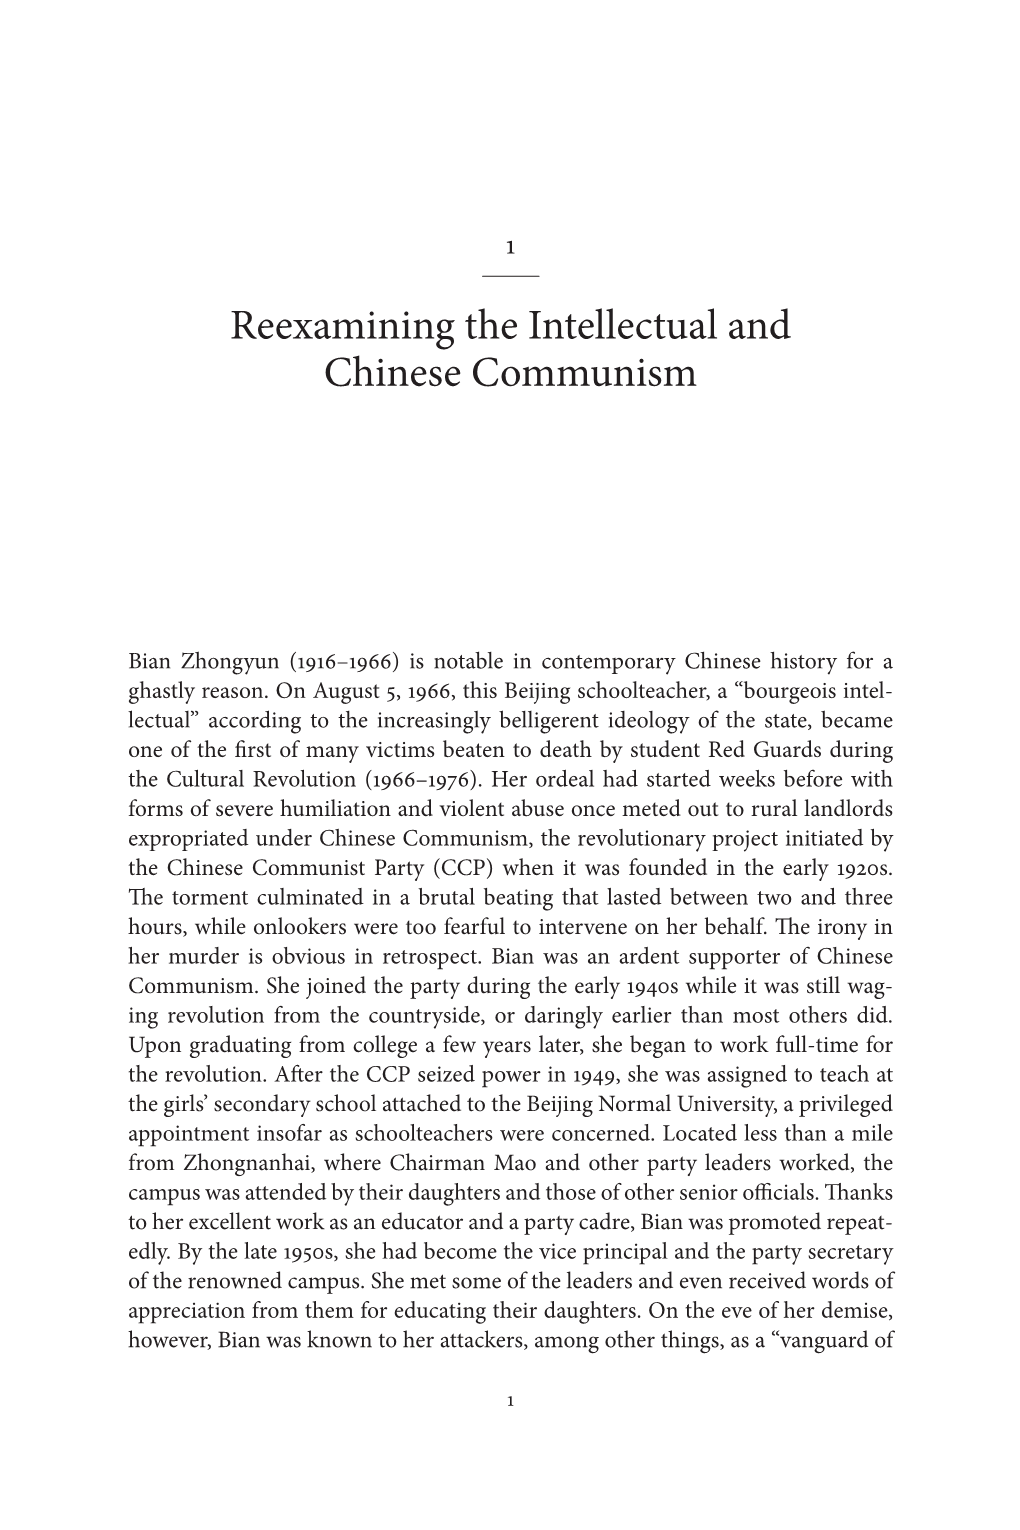 Reexamining the Intellectual and Chinese Communism